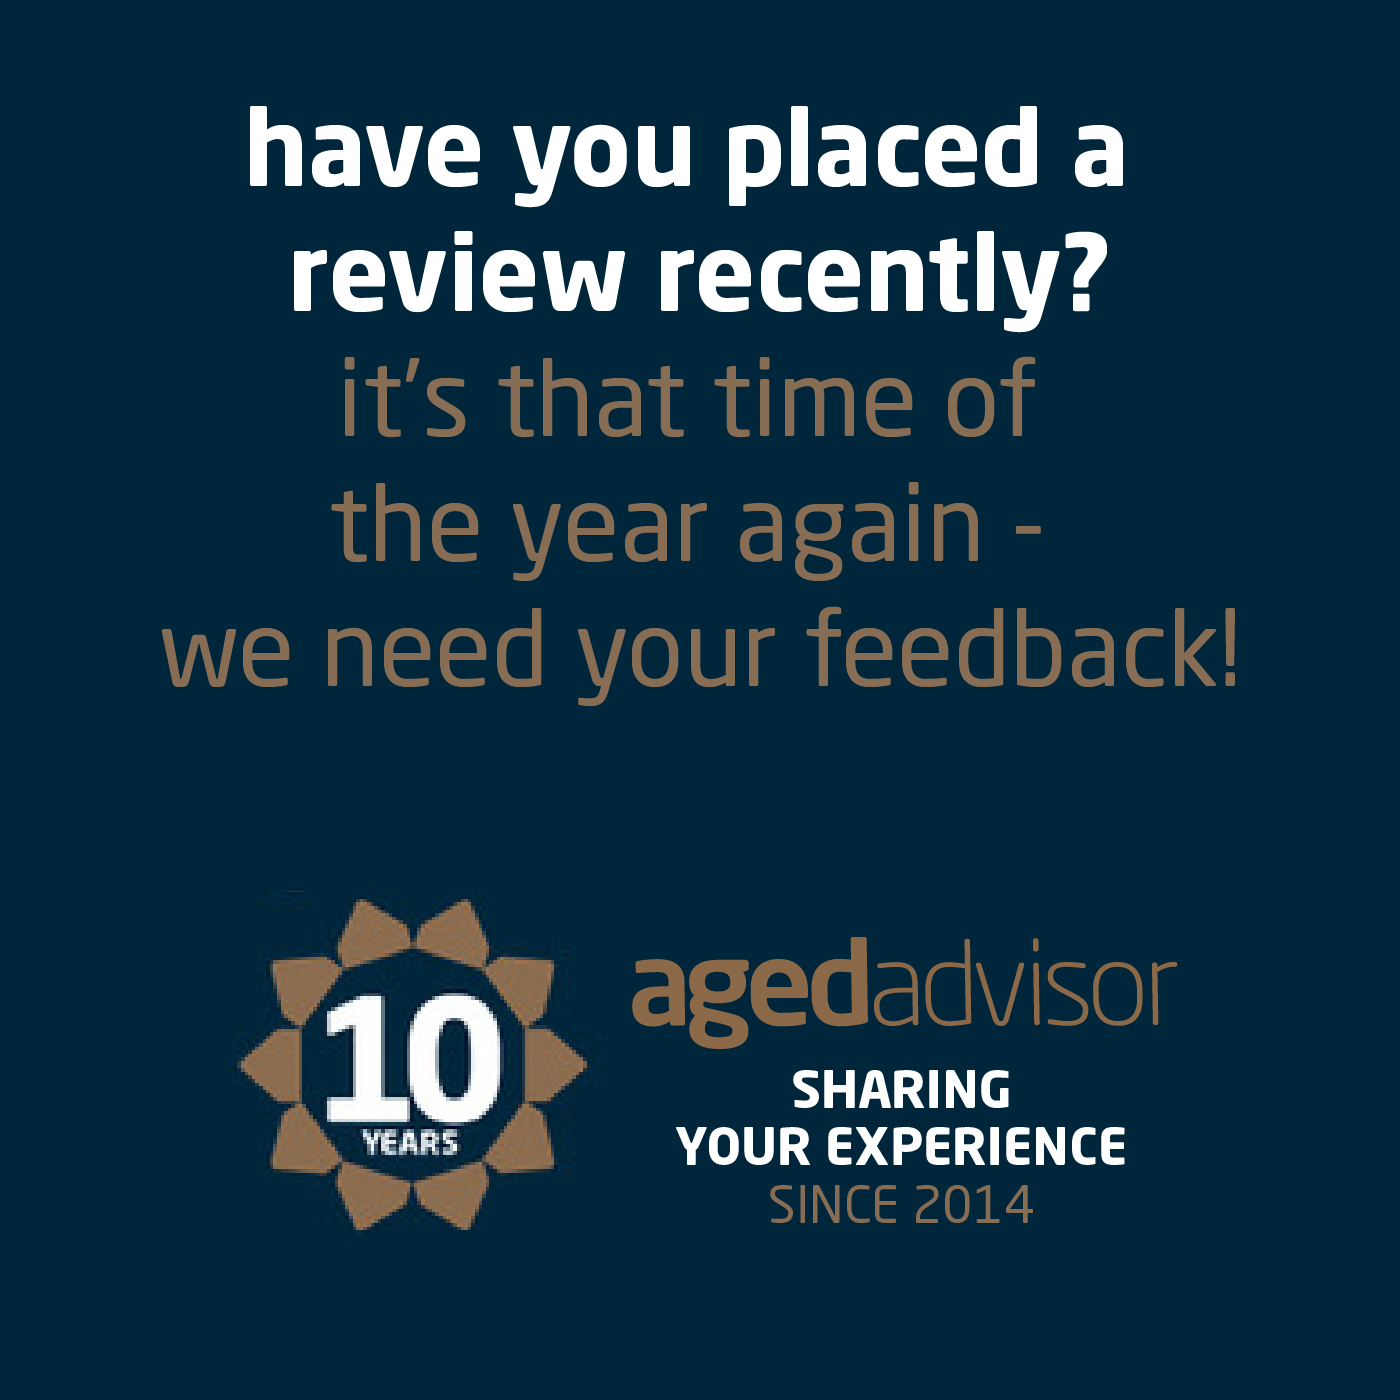 Have you placed a review lately?